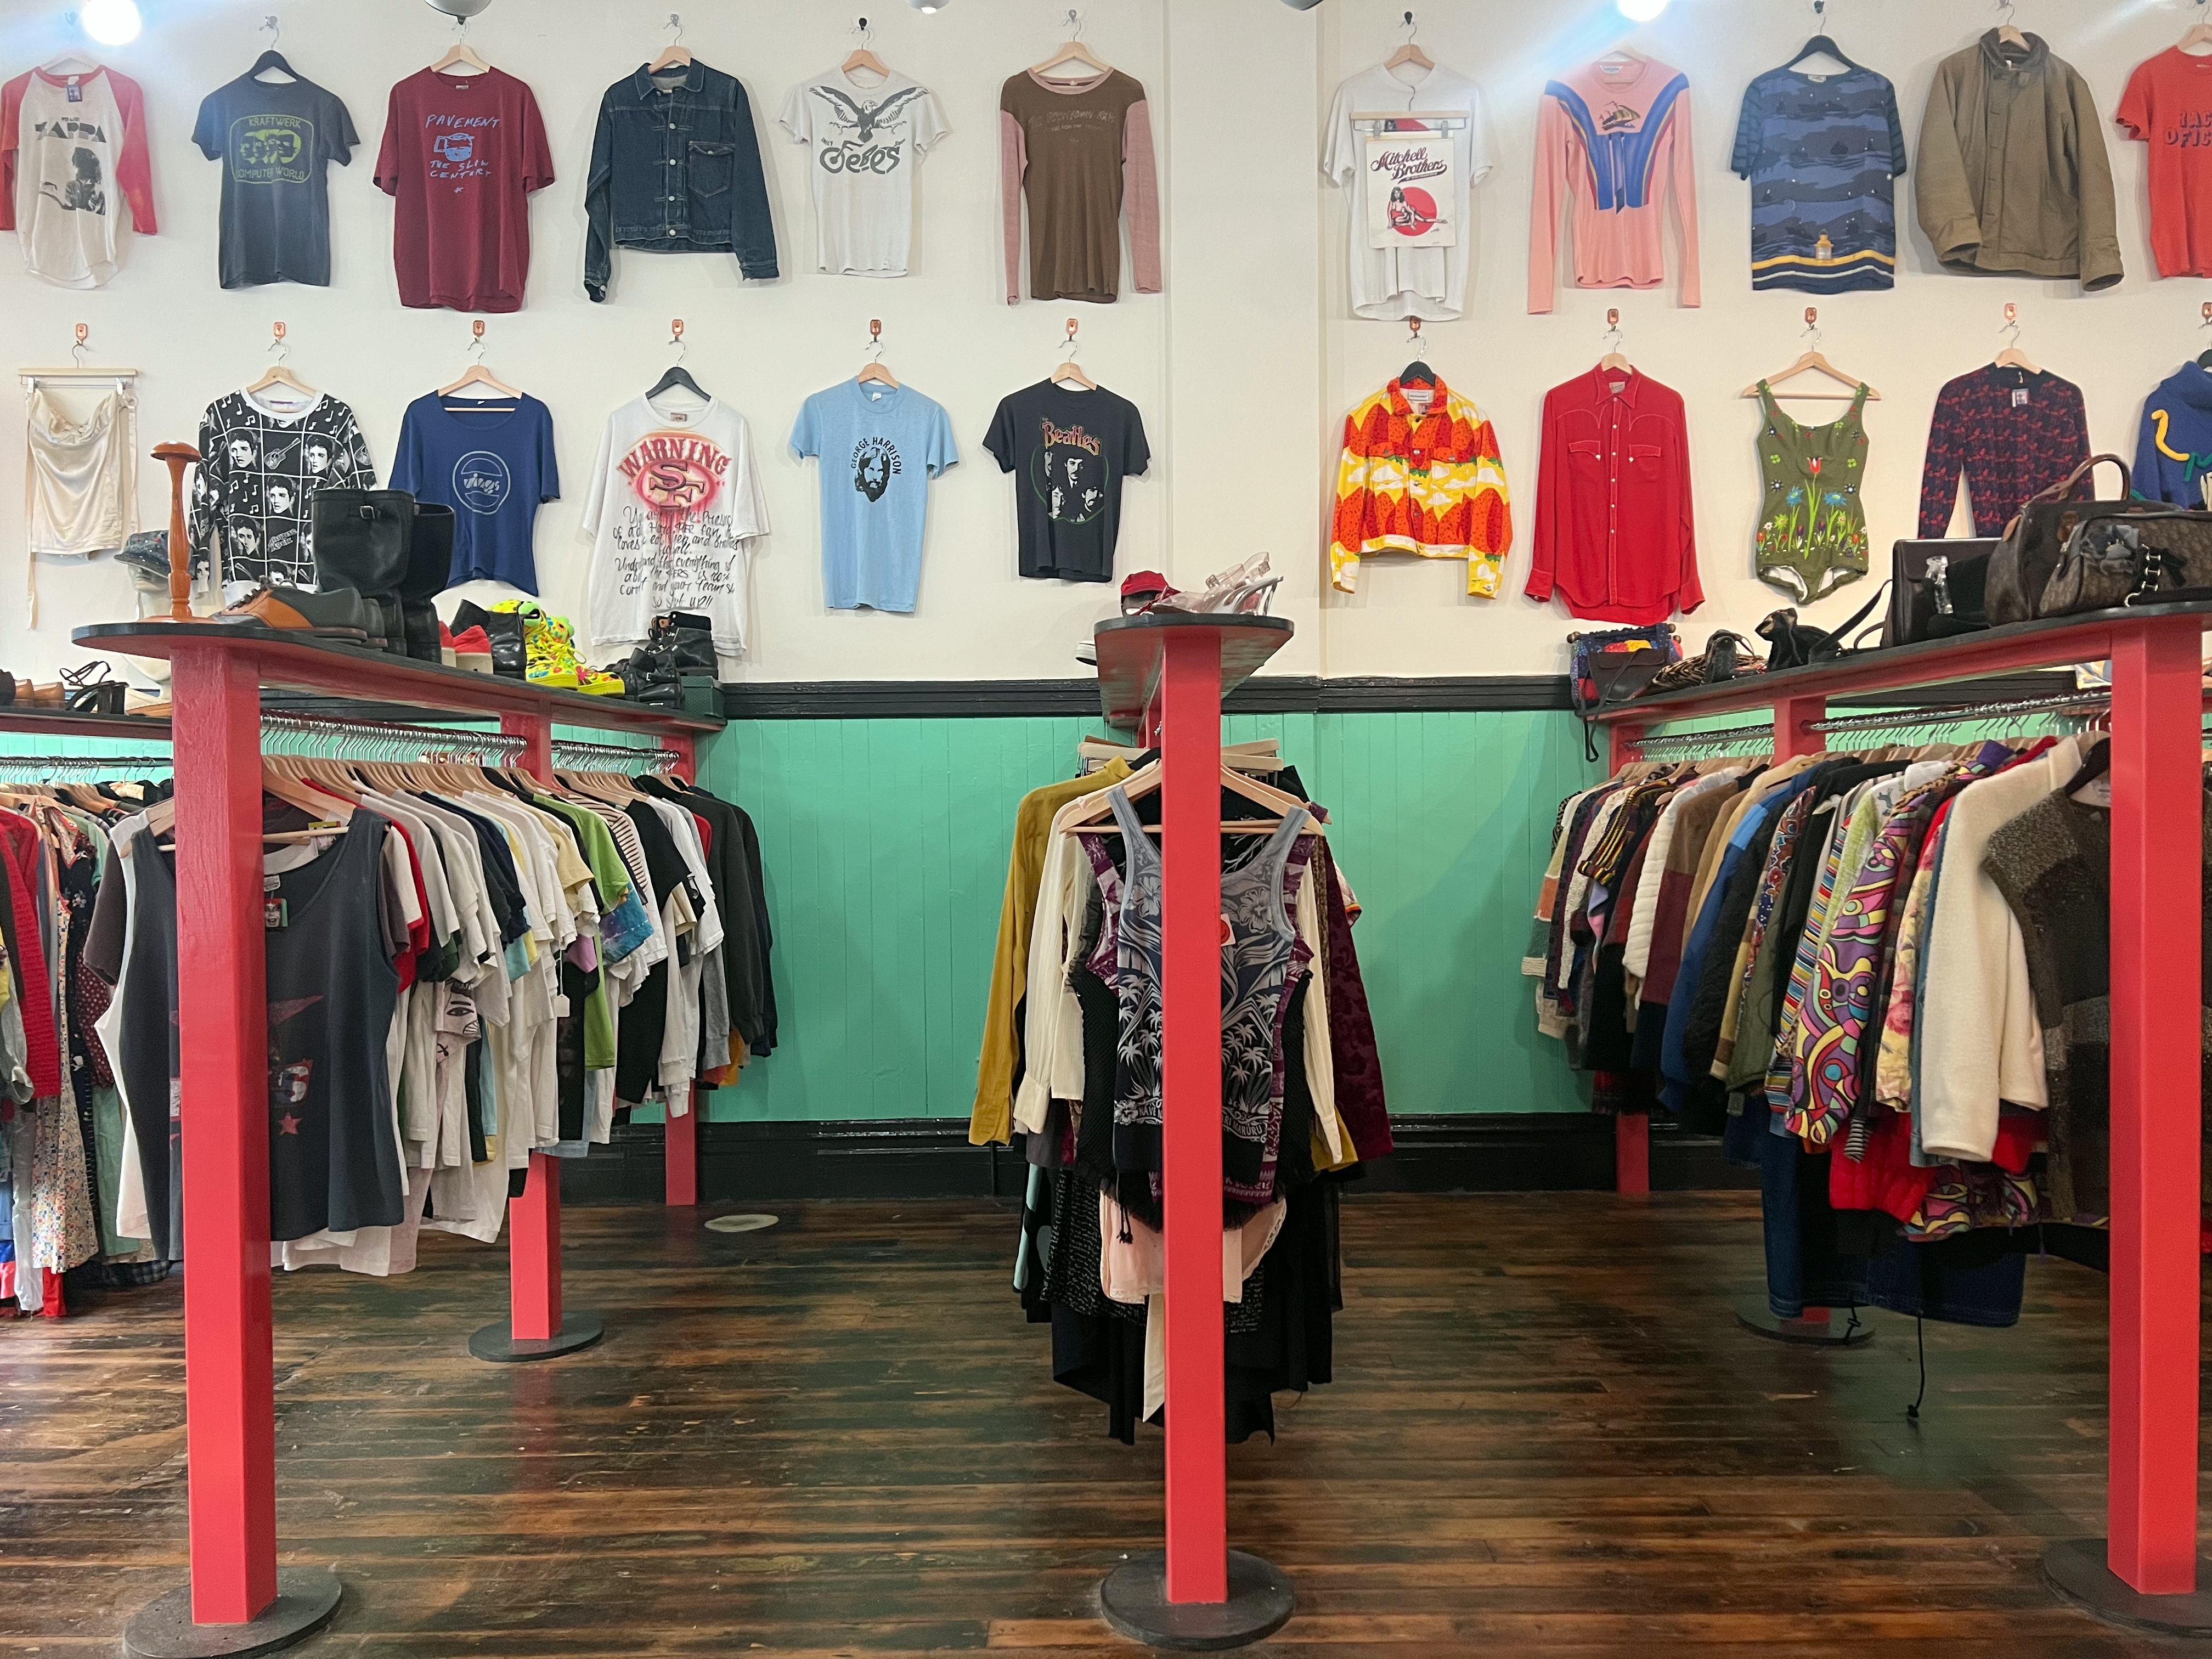 Popular North Beach vintage clothing shop Vacation opens new sister